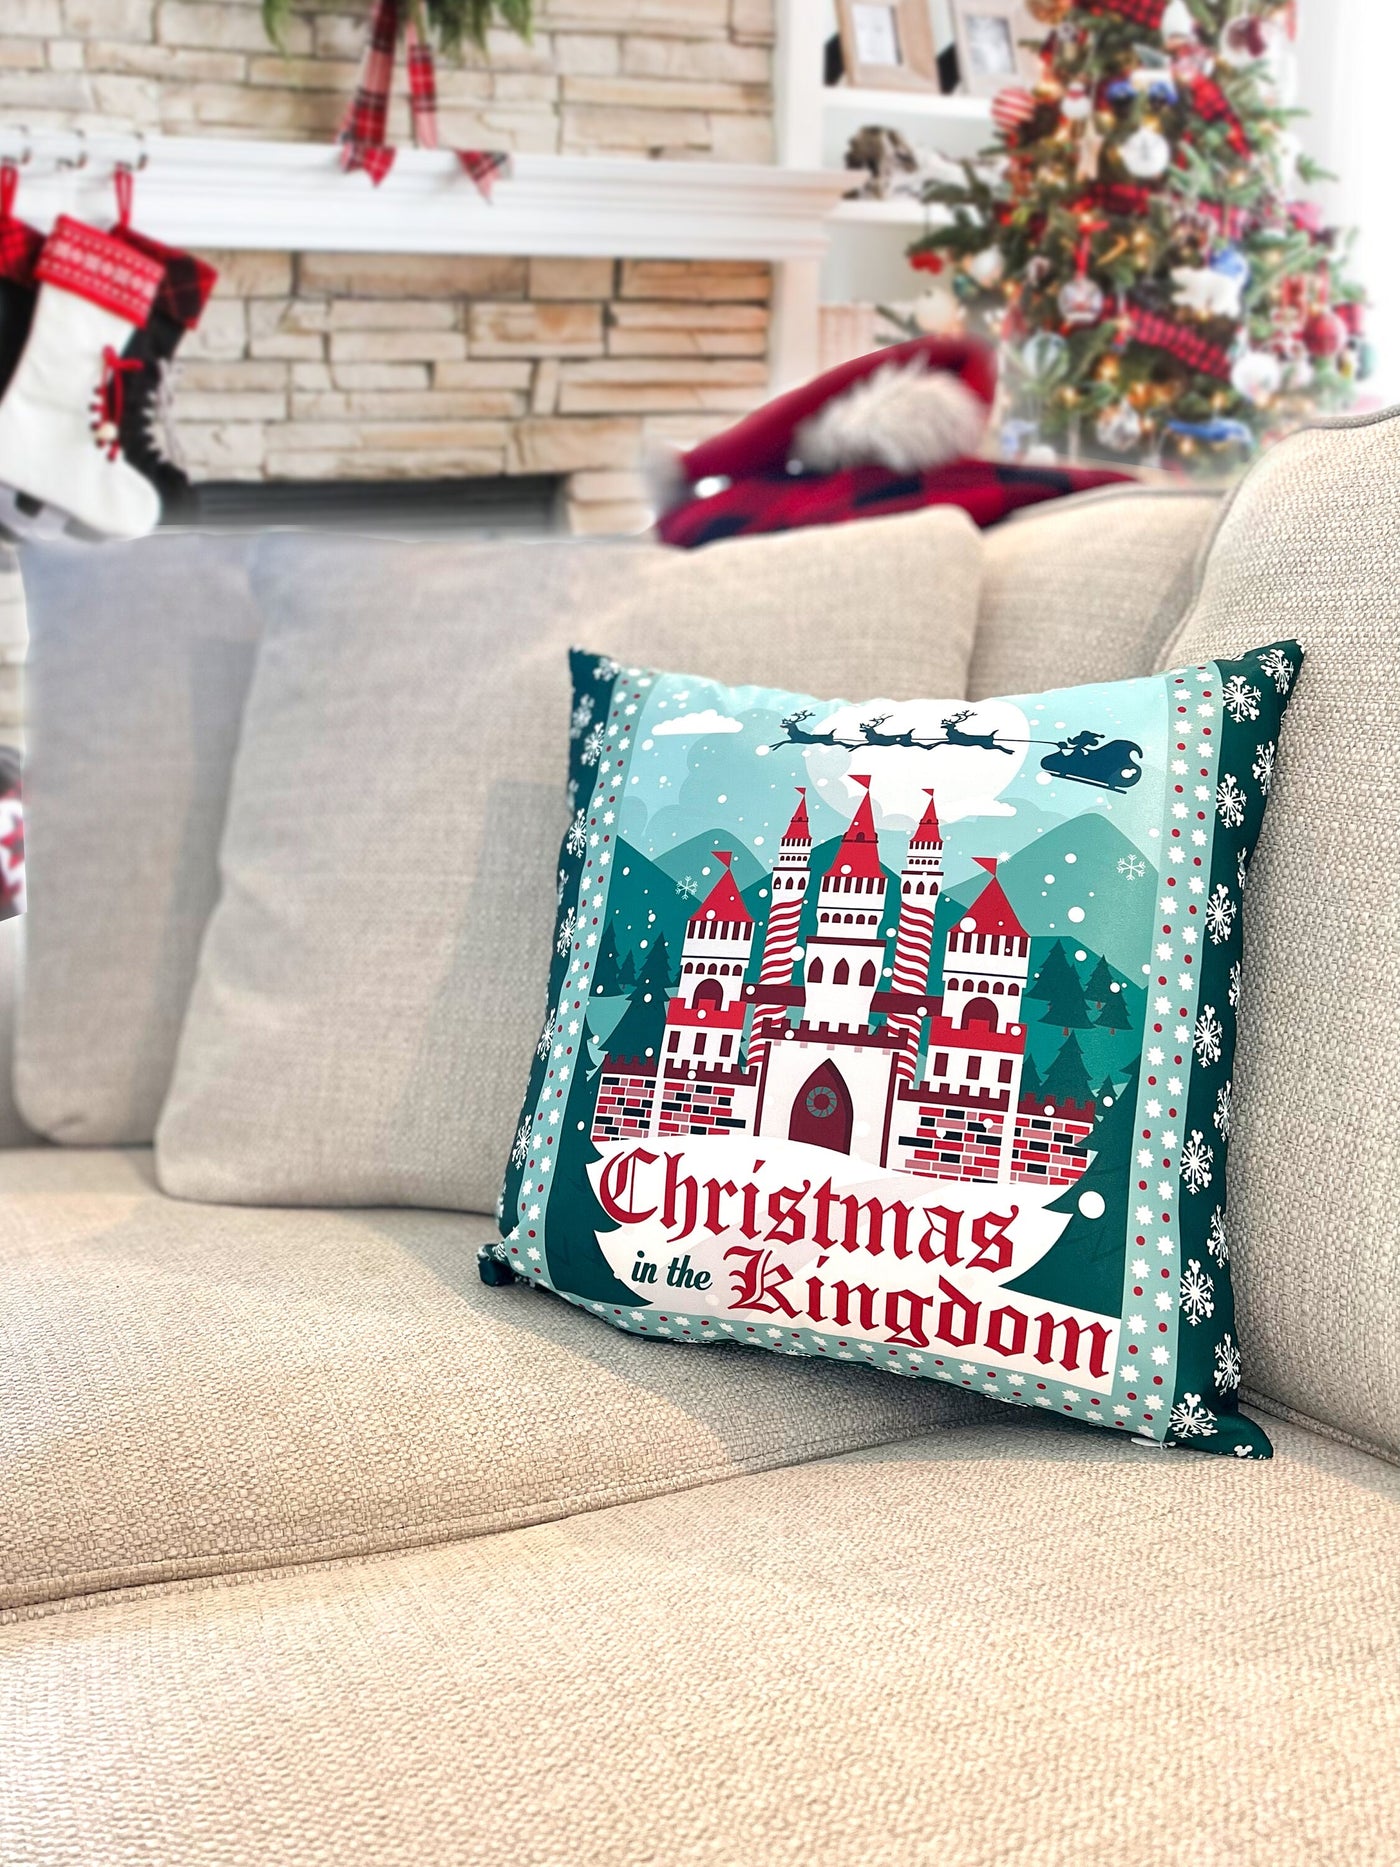 Christmas in the Kingdom Pillow Covers / Cases (2 Per Order)